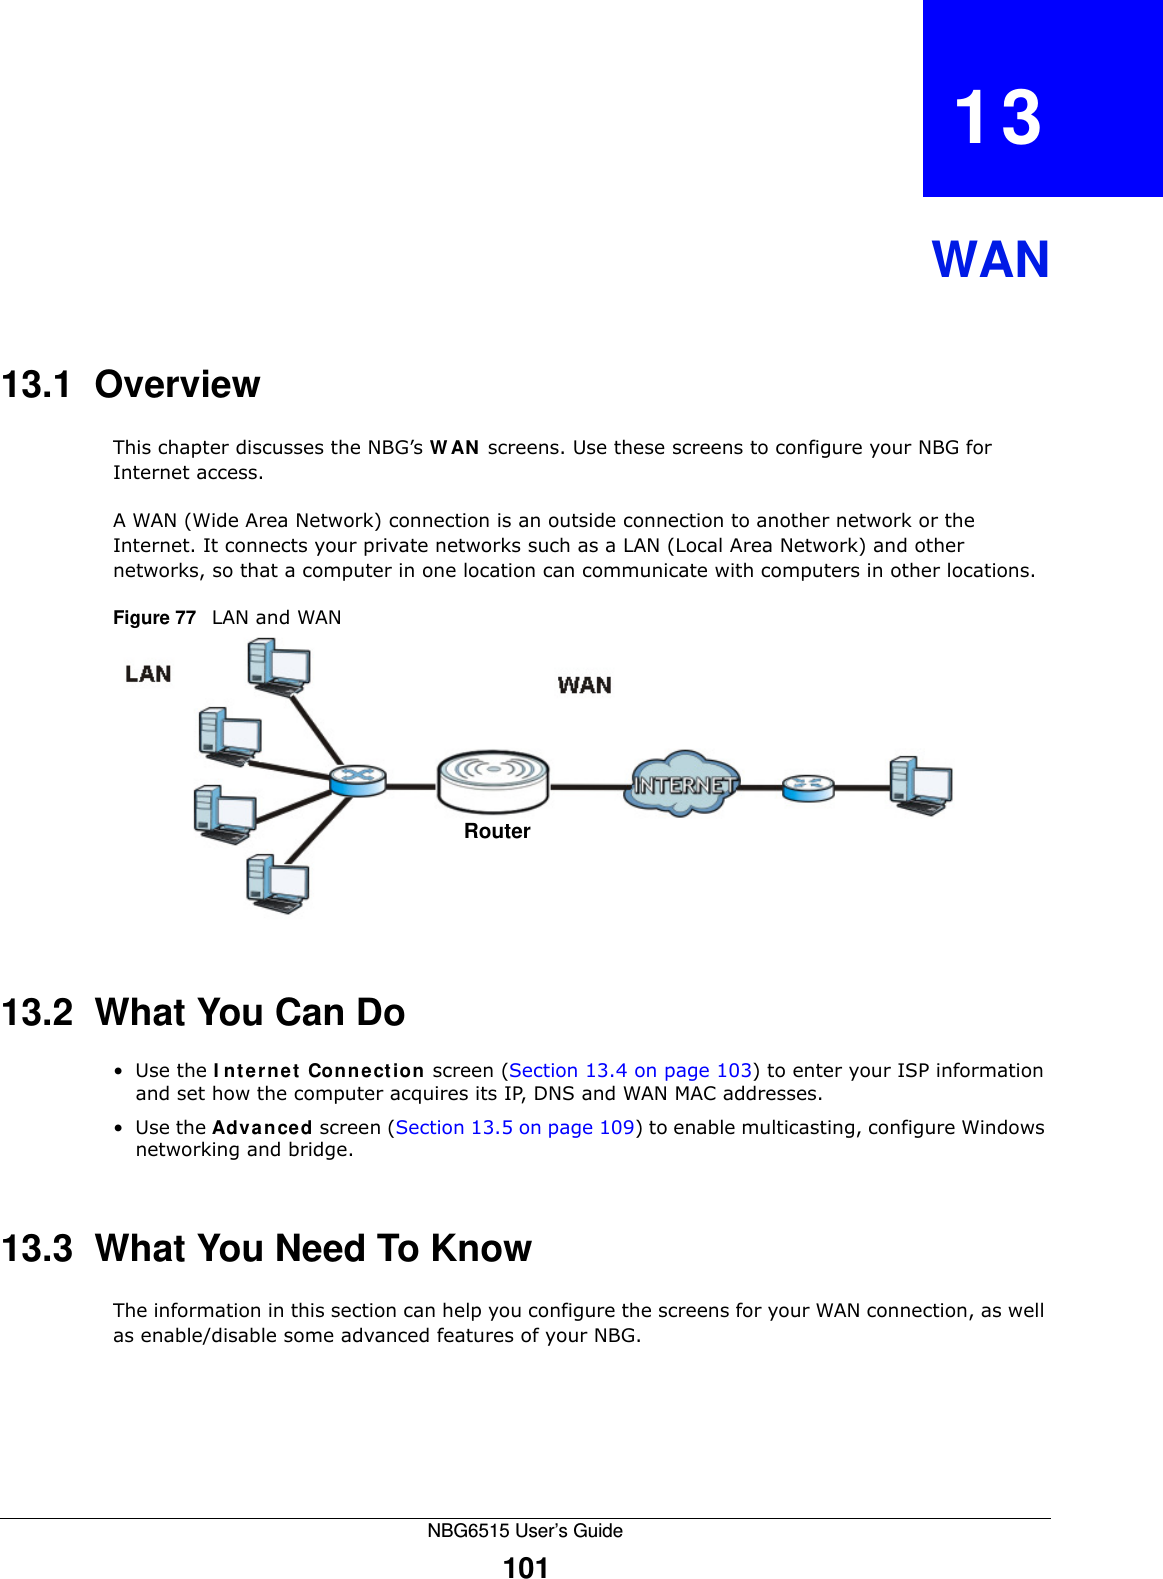 NBG6515 User’s Guide101CHAPTER   13WAN13.1  OverviewThis chapter discusses the NBG’s WAN screens. Use these screens to configure your NBG for Internet access.A WAN (Wide Area Network) connection is an outside connection to another network or the Internet. It connects your private networks such as a LAN (Local Area Network) and other networks, so that a computer in one location can communicate with computers in other locations.Figure 77   LAN and WAN13.2  What You Can Do•Use the Internet Connection screen (Section 13.4 on page 103) to enter your ISP information and set how the computer acquires its IP, DNS and WAN MAC addresses.•Use the Advanced screen (Section 13.5 on page 109) to enable multicasting, configure Windows networking and bridge.13.3  What You Need To KnowThe information in this section can help you configure the screens for your WAN connection, as well as enable/disable some advanced features of your NBG.Router